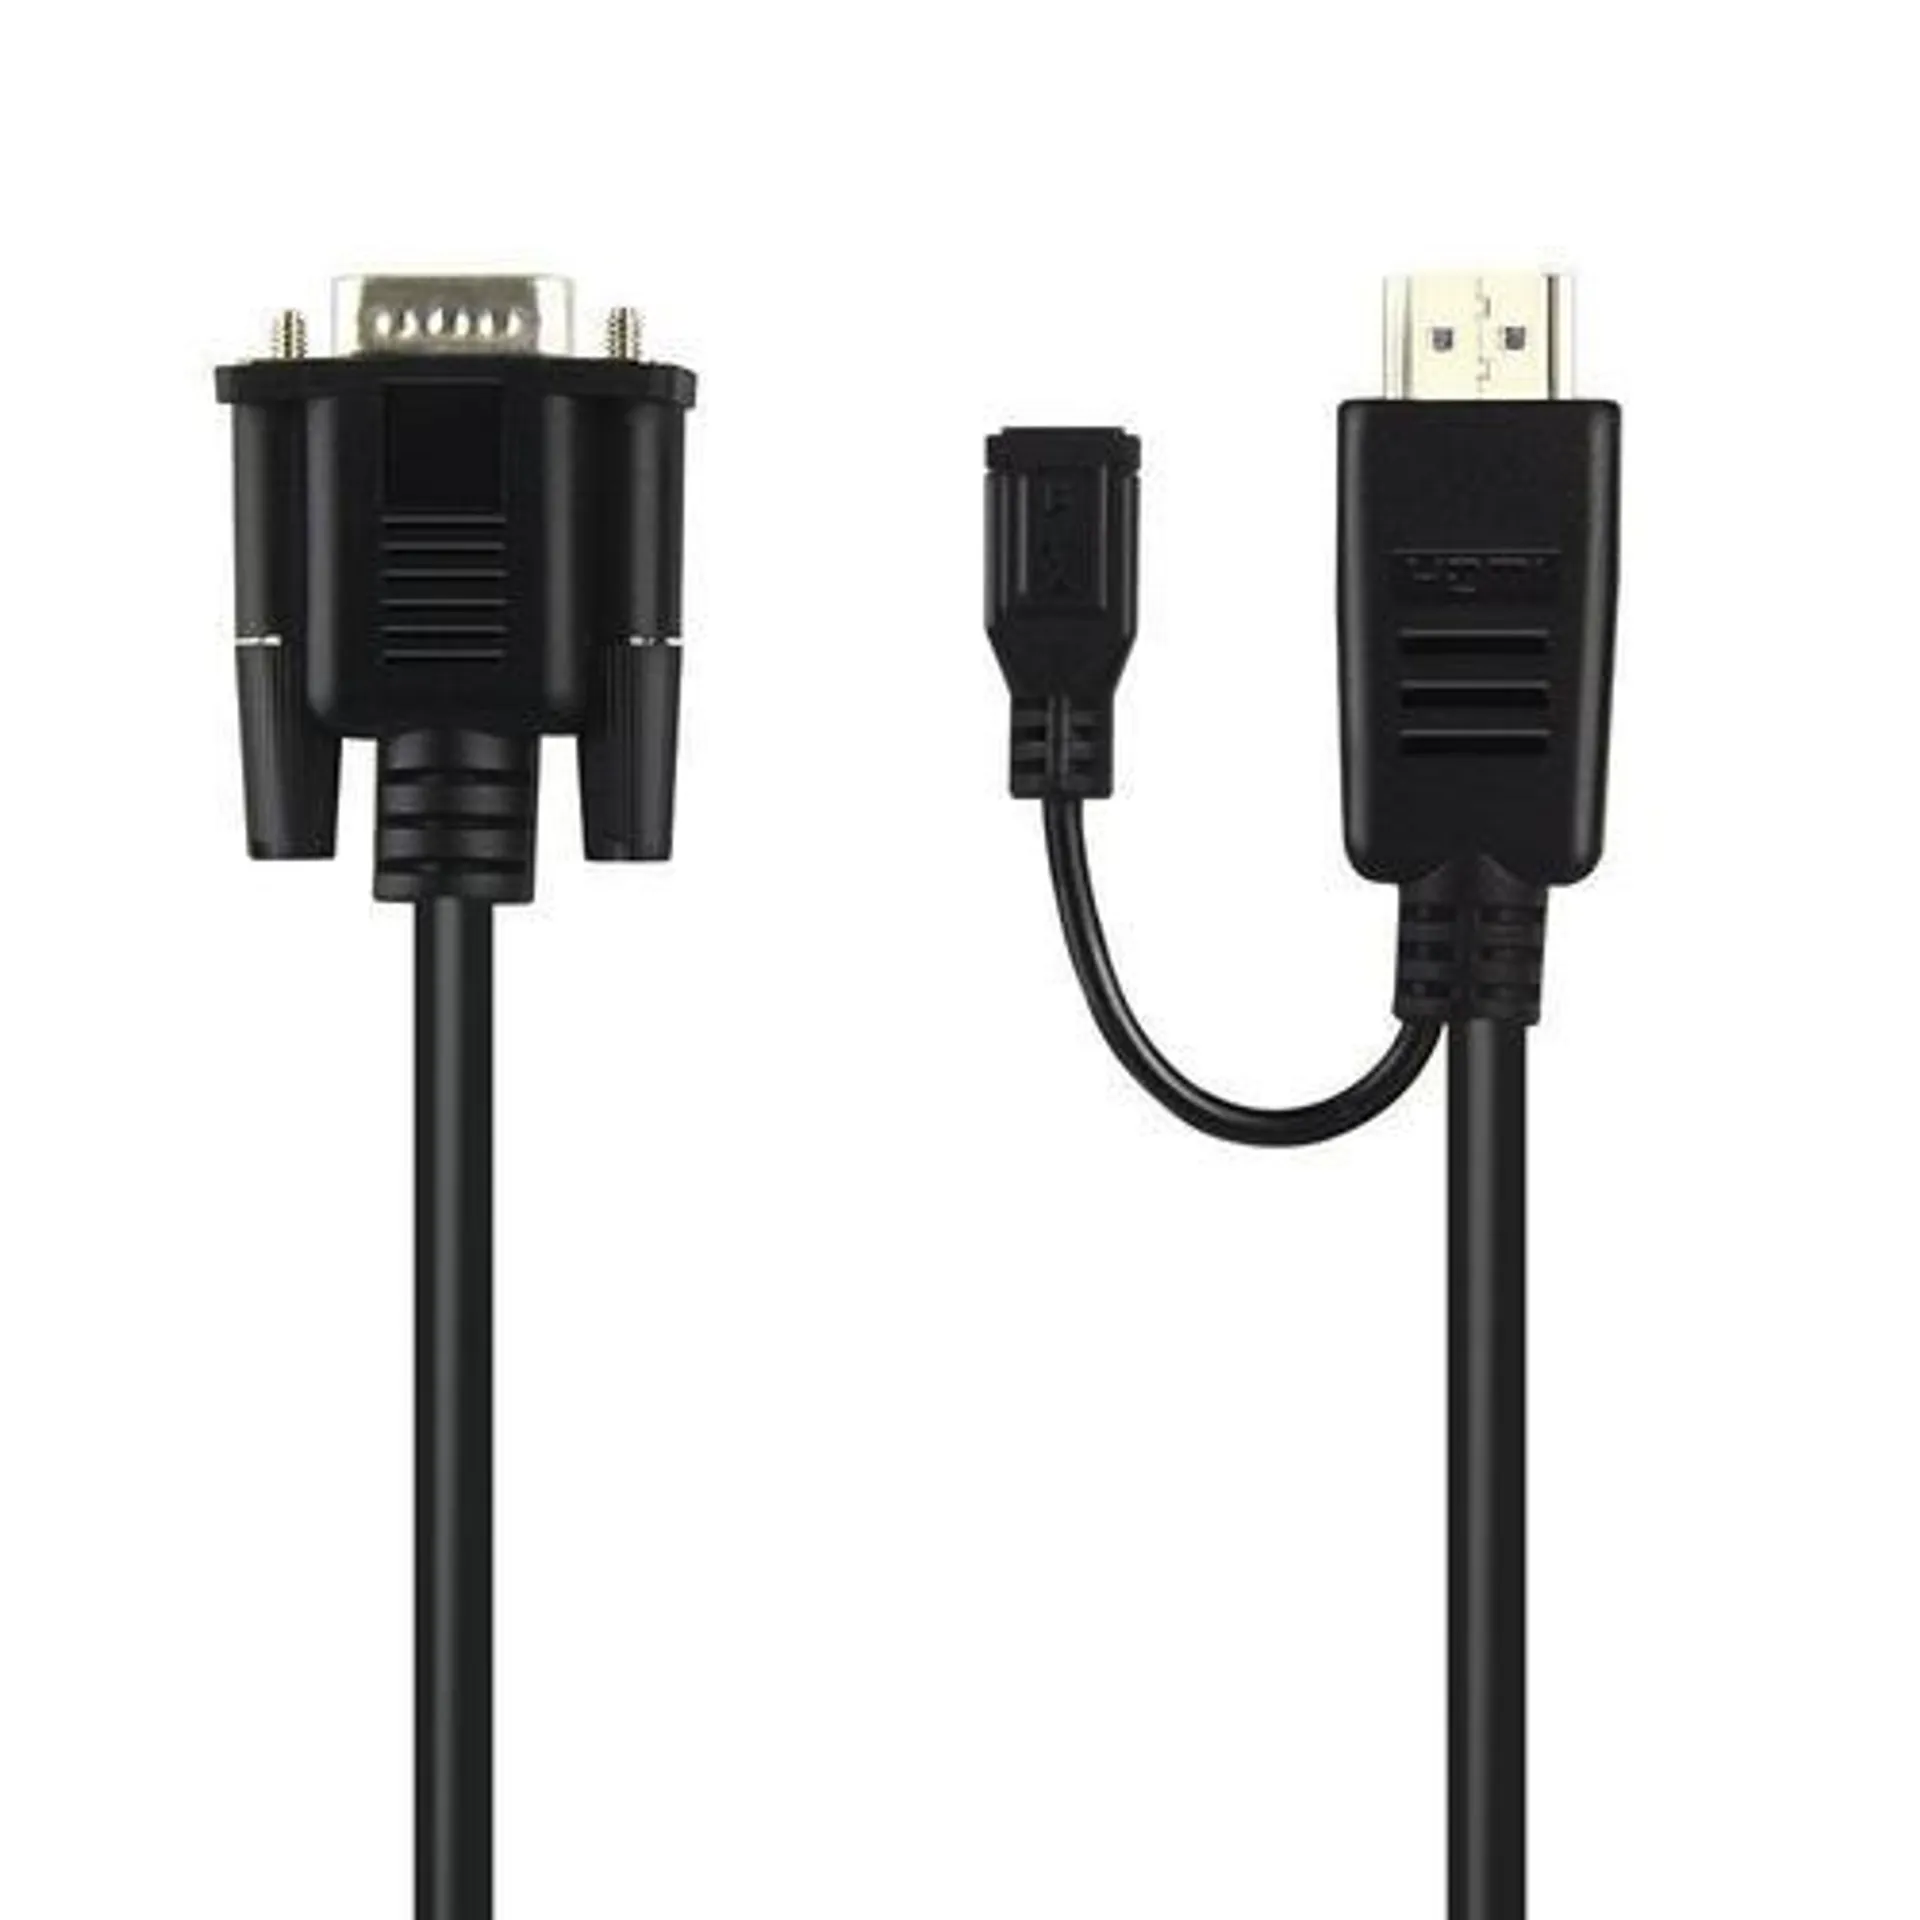 HDMI to VGA active converter cable adapter M/M with Micro USB power supply - 6FT PrimeCables®